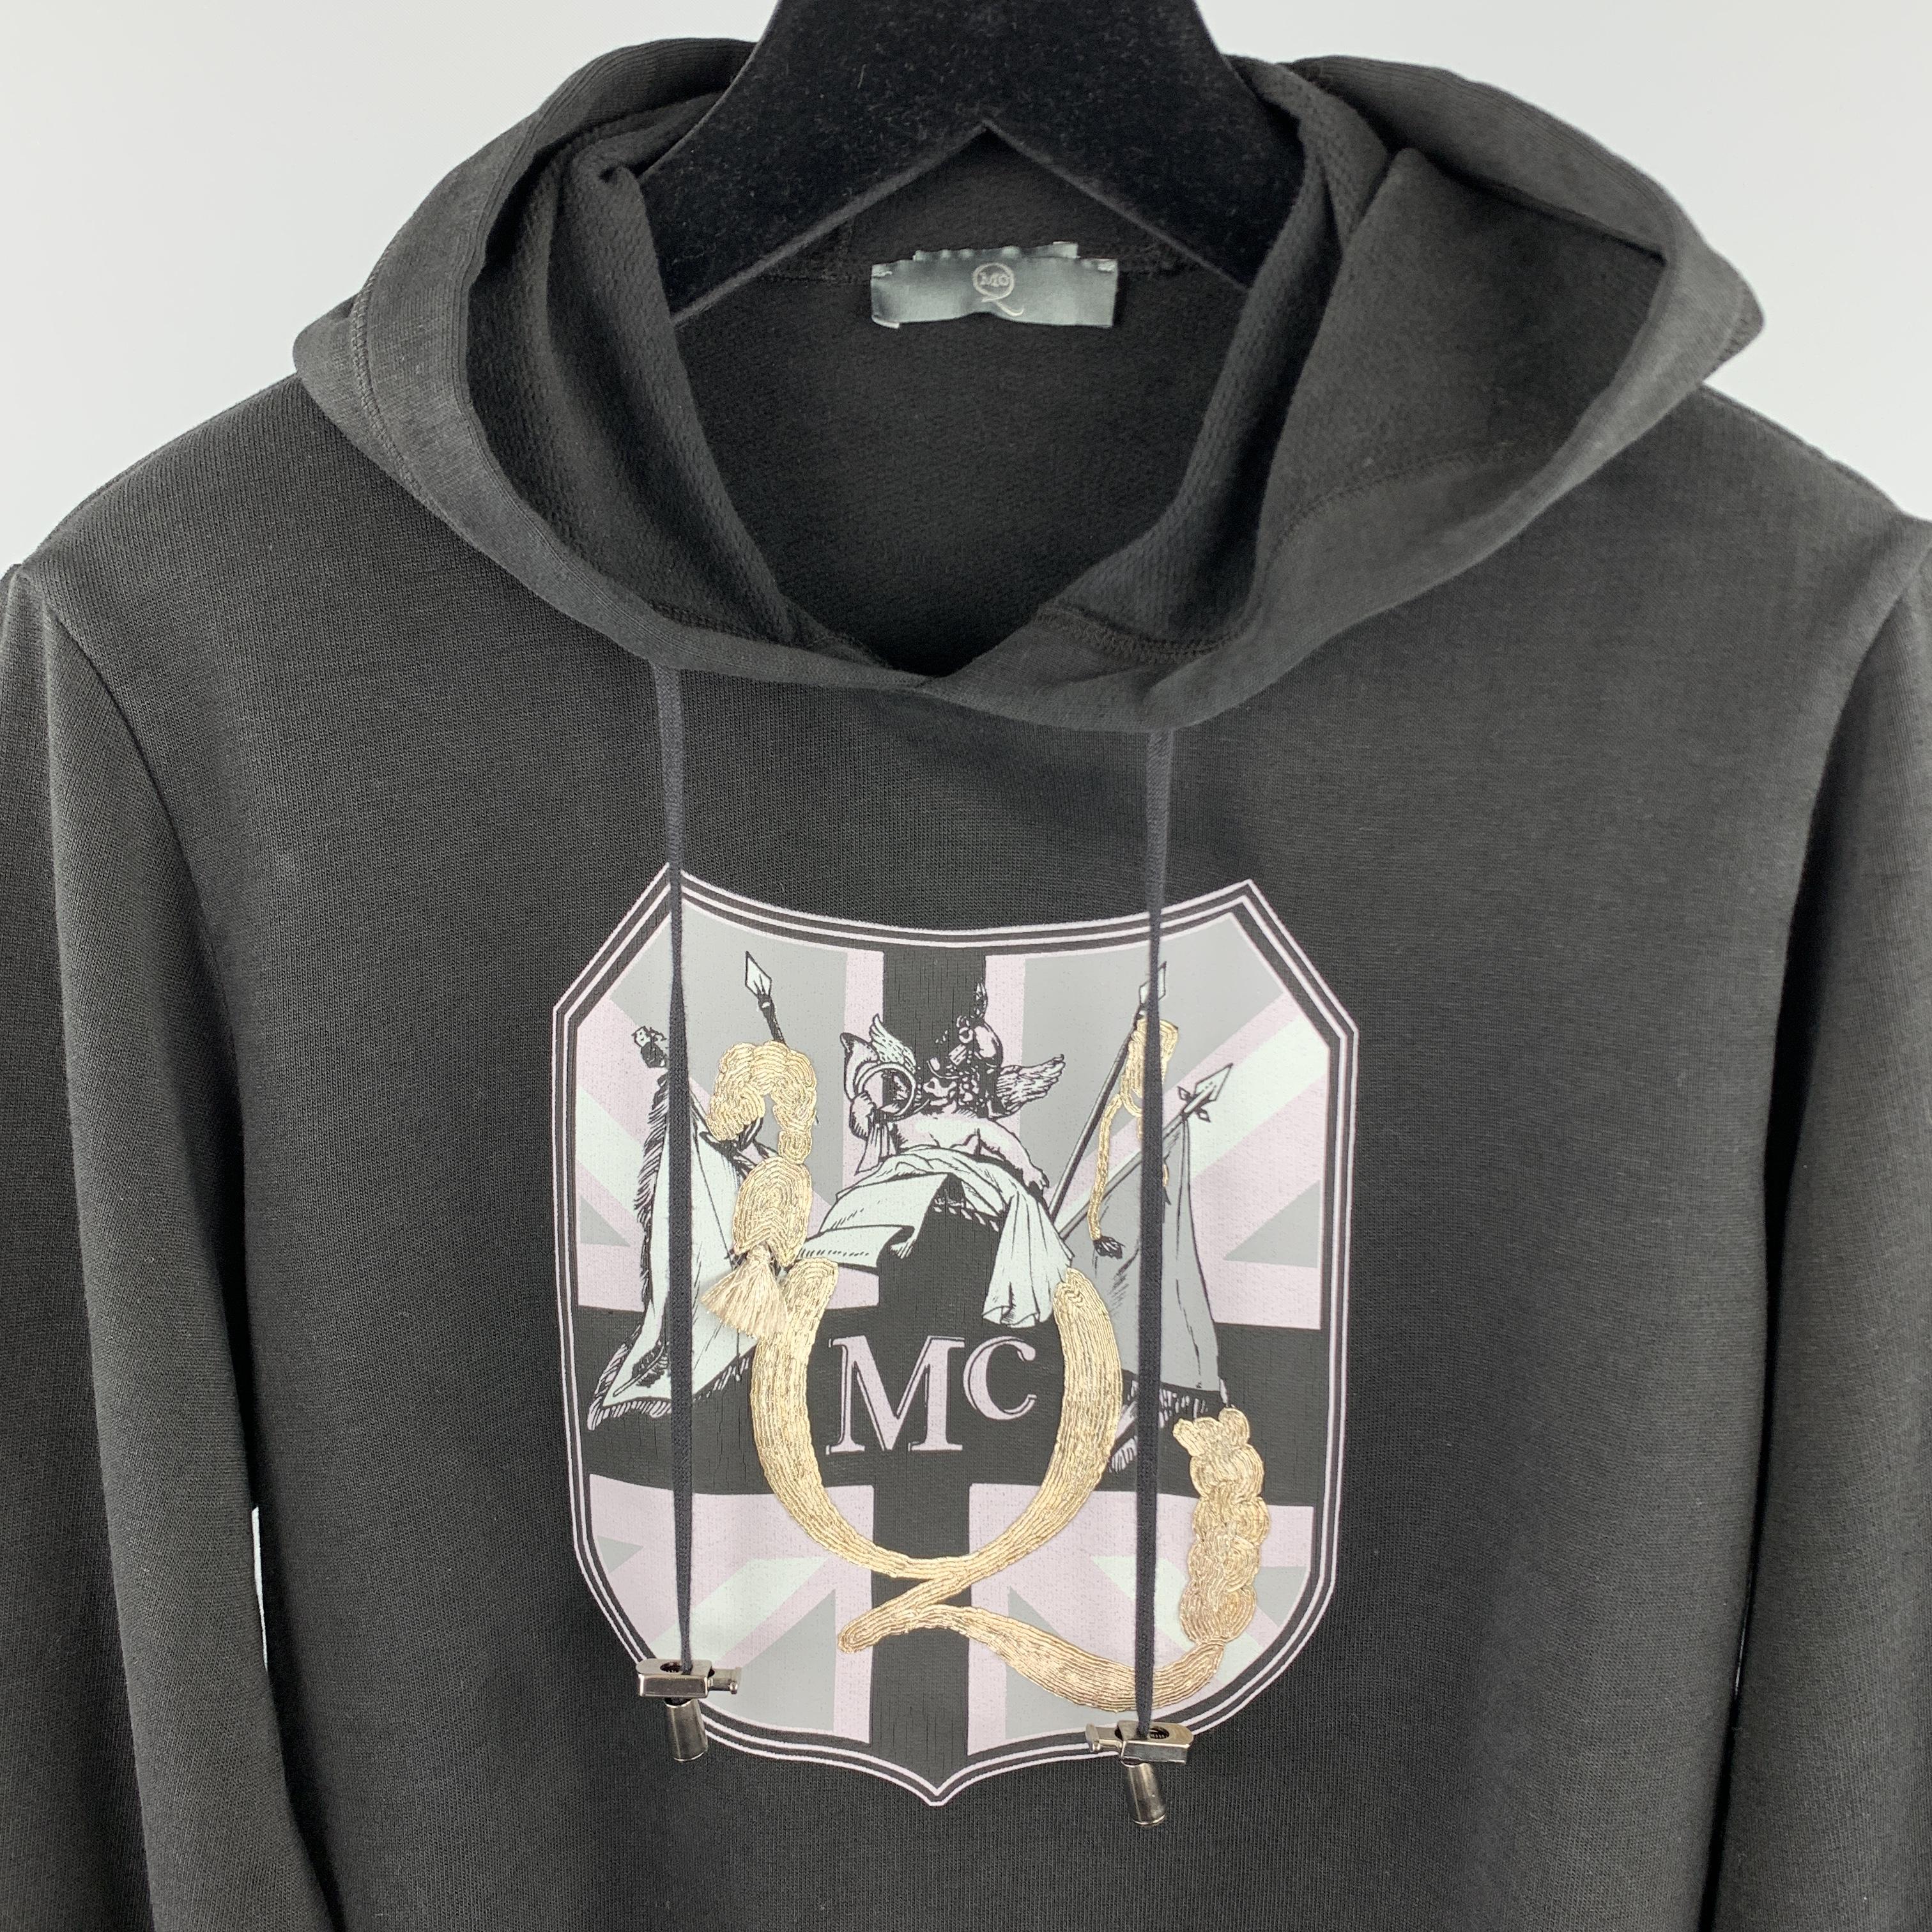 MCQ by ALEXANDER MCQUEEN sweatshirt comes in a solid black cotton material, featuring a hood, a graphic and embellishment at chest, silver tone metal hardware, and ribbed cuffs and hem. Made in Italy.

Very Good Pre-Owned Condition.
Marked: US